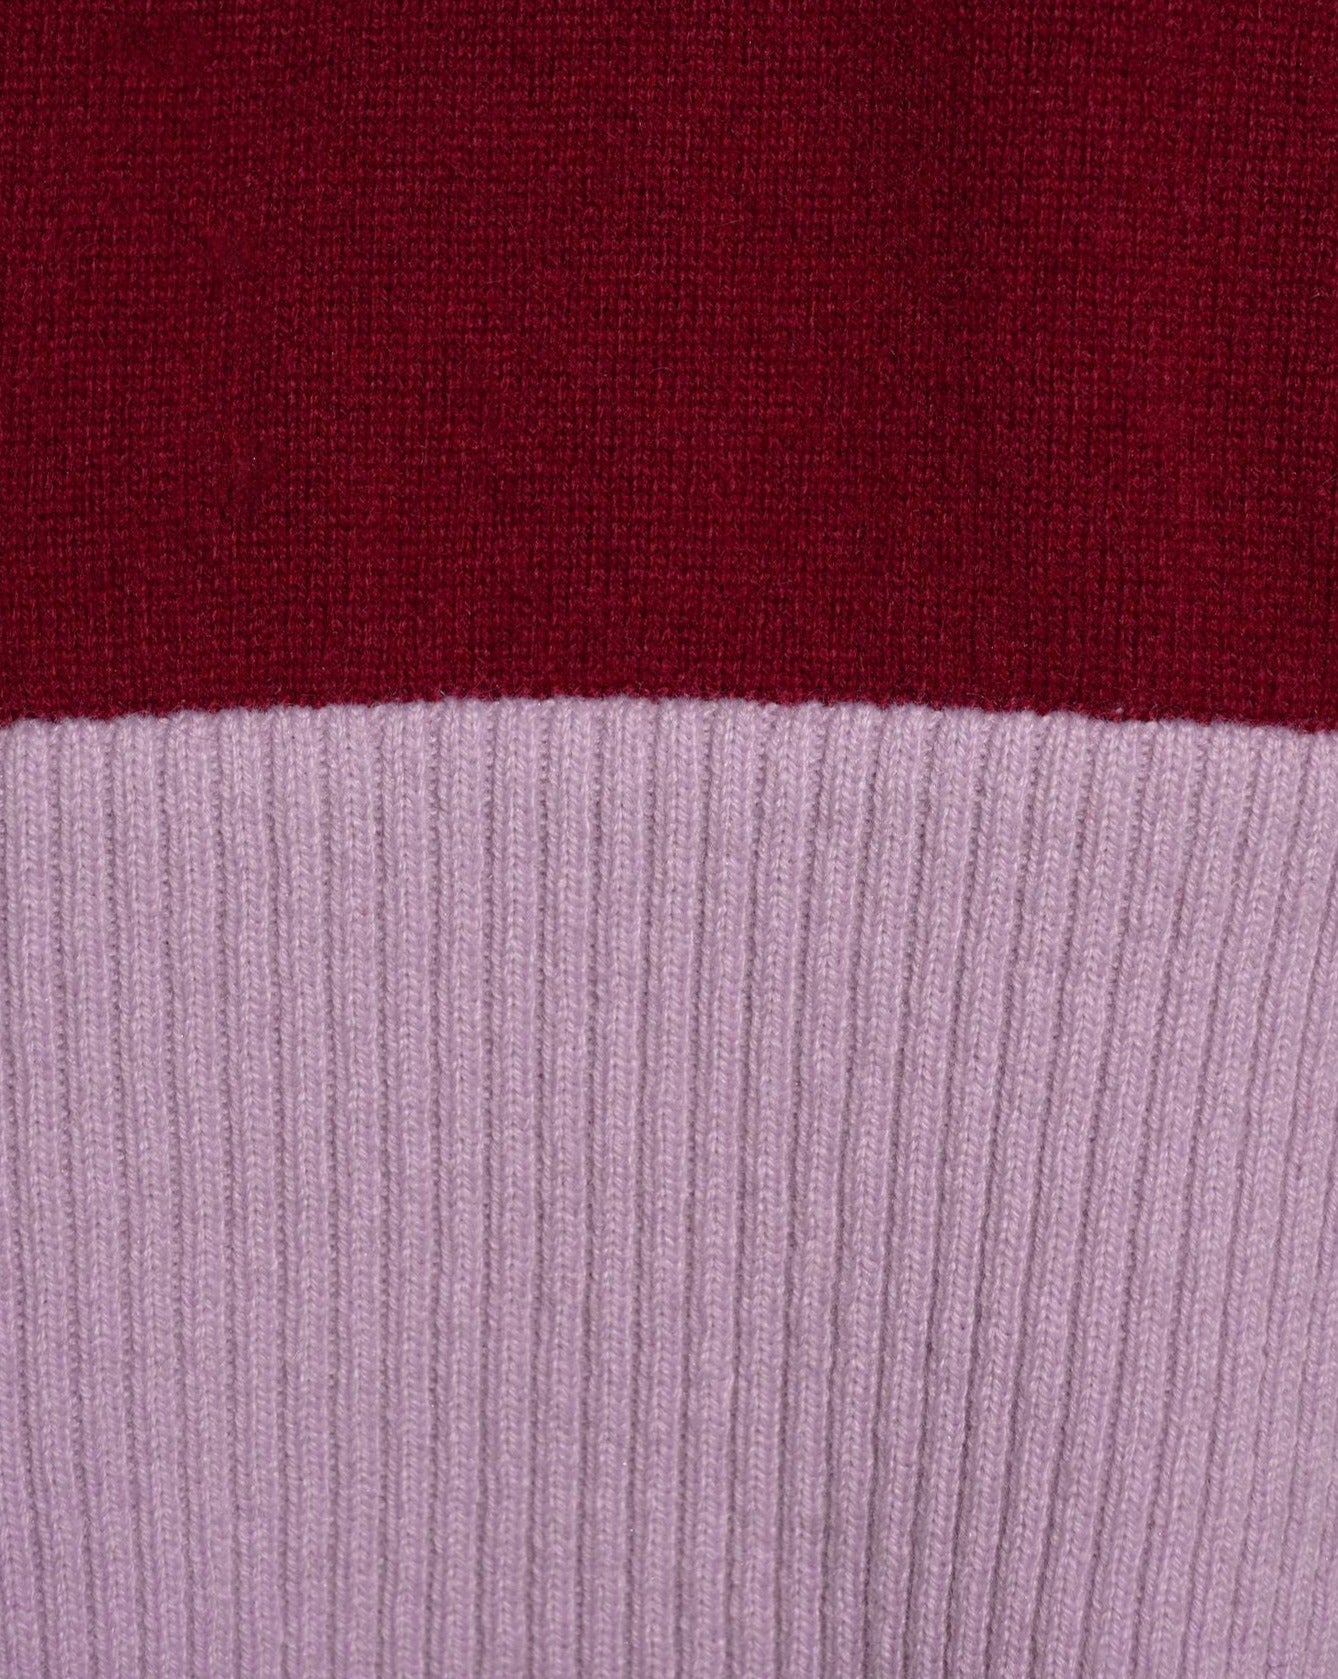 aalis FLURINA hi-lo cashmere sweater with mesh detail (Red lilac)